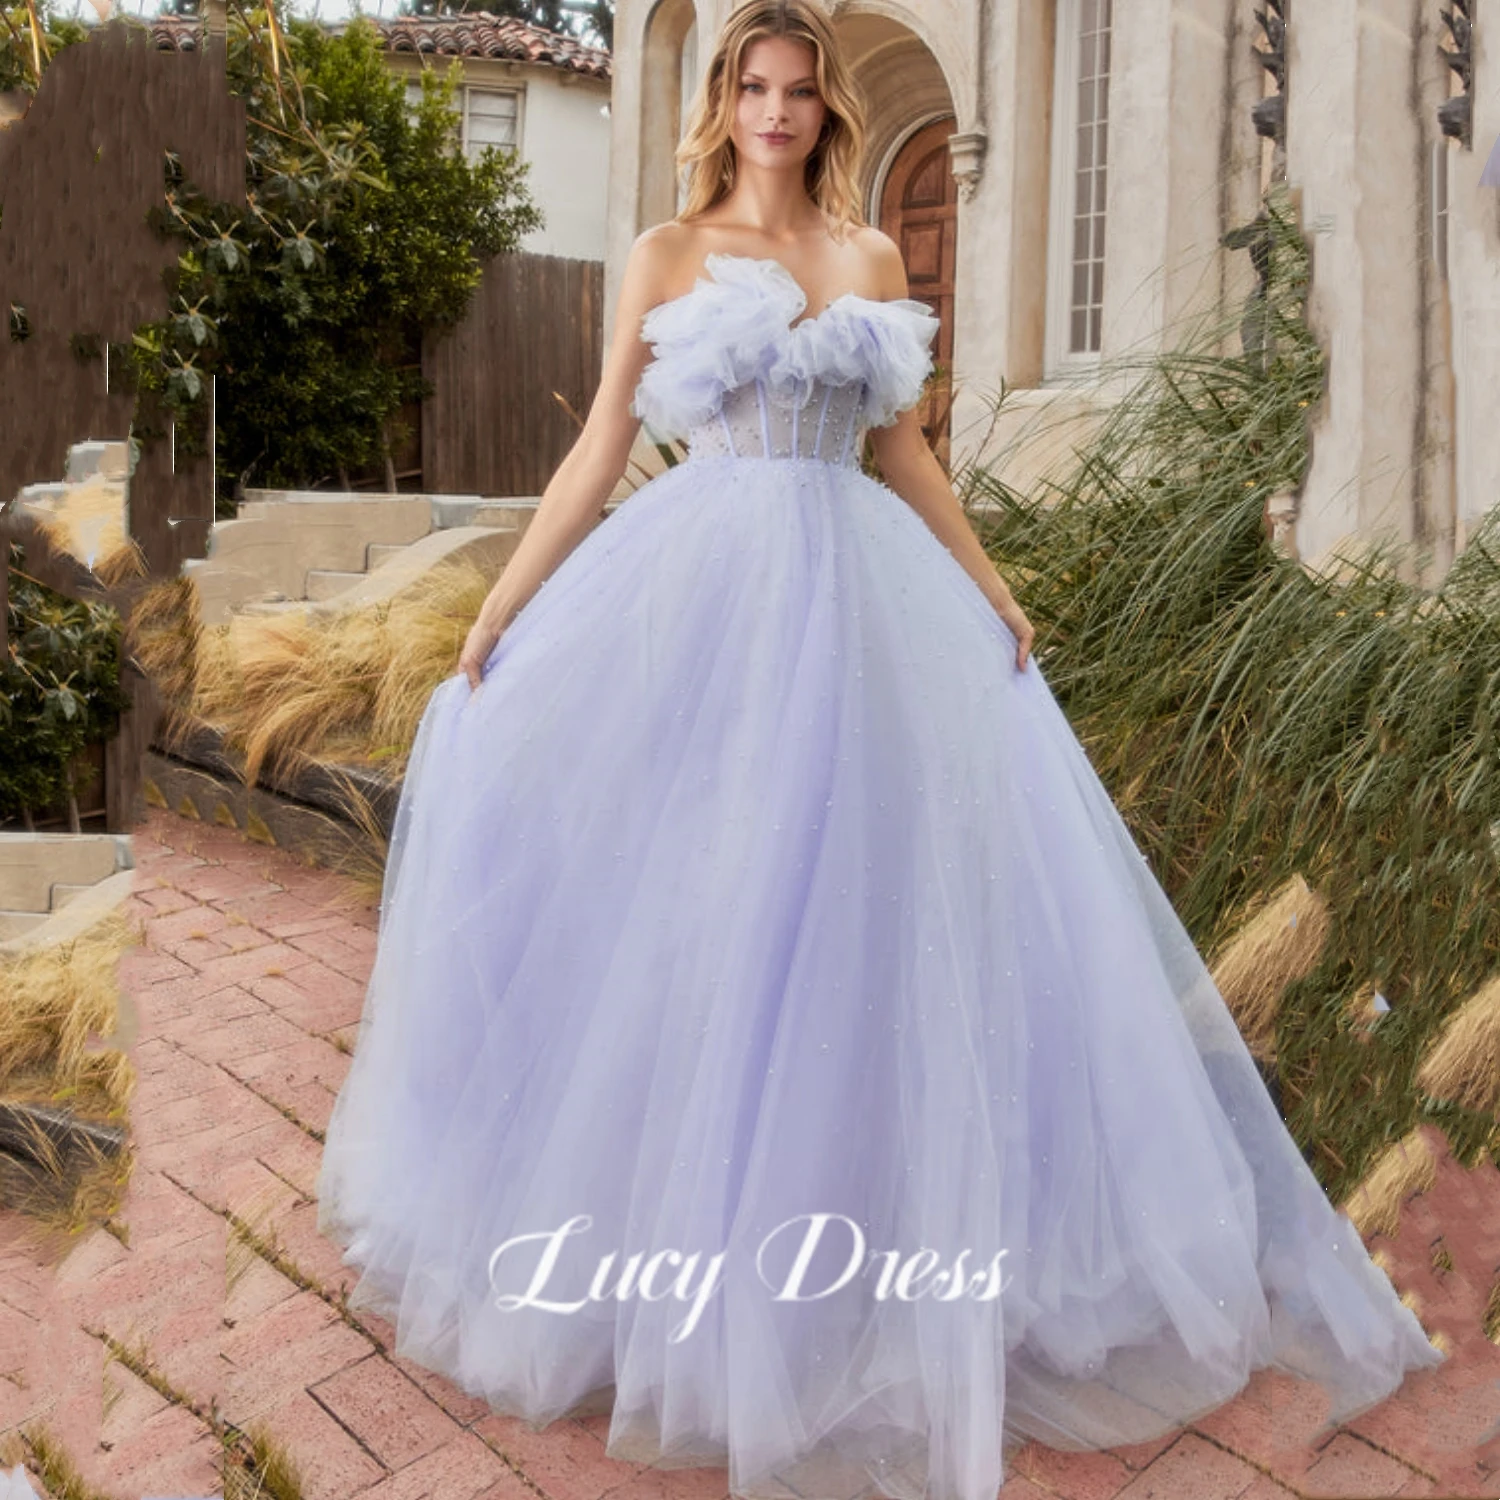 

Lucy Lavender Exquisite Strapless Pearls Tulle Prom Party Dress Princess Sweetheart Backless A Line Formal Fairy Evening Gown